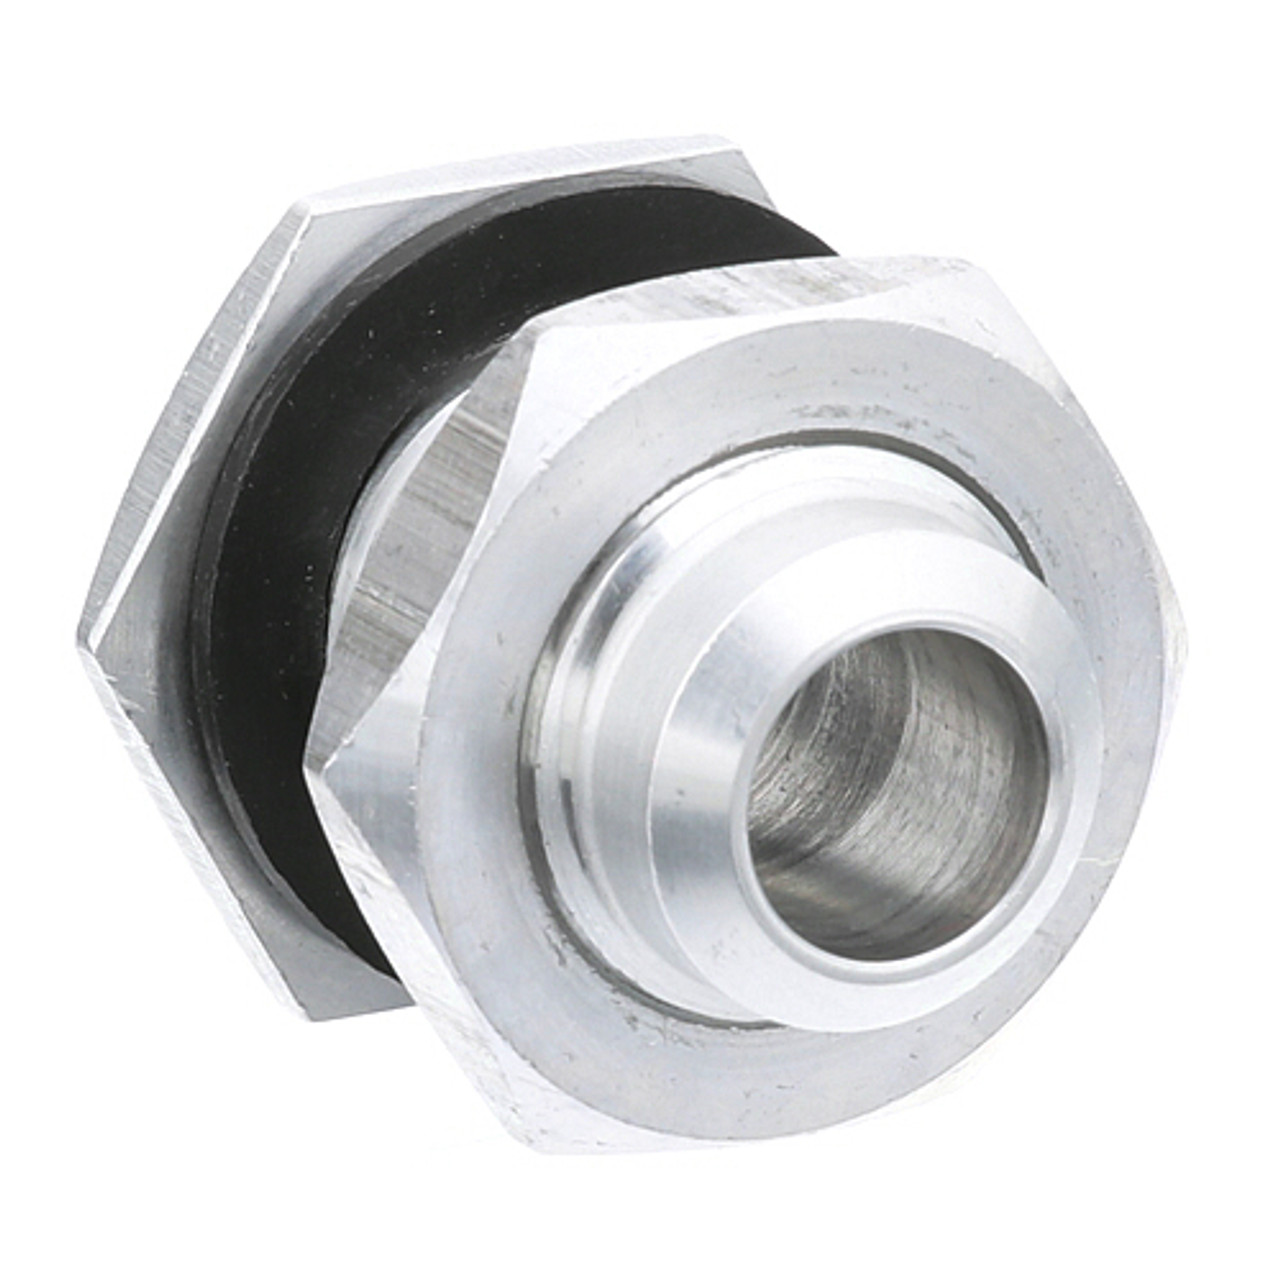 Drain Fitting 5/8 Plug Nut - Replacement Part For Bohn 66708001